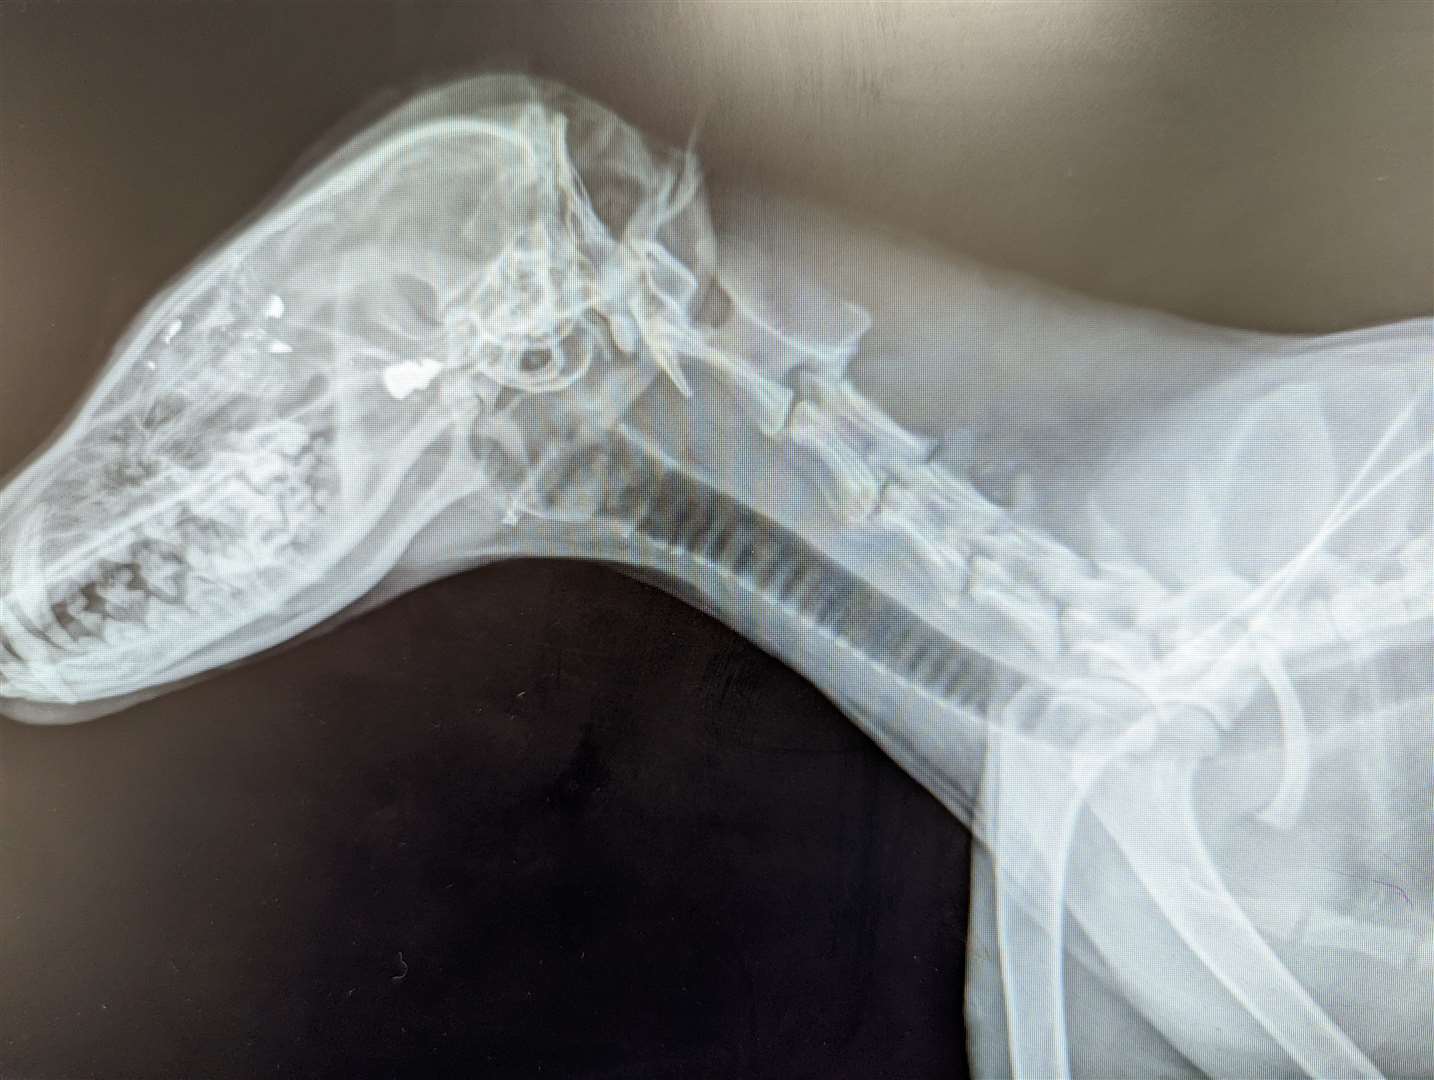 X-rays revealed the fox had been shot twice - in the abdomen and face